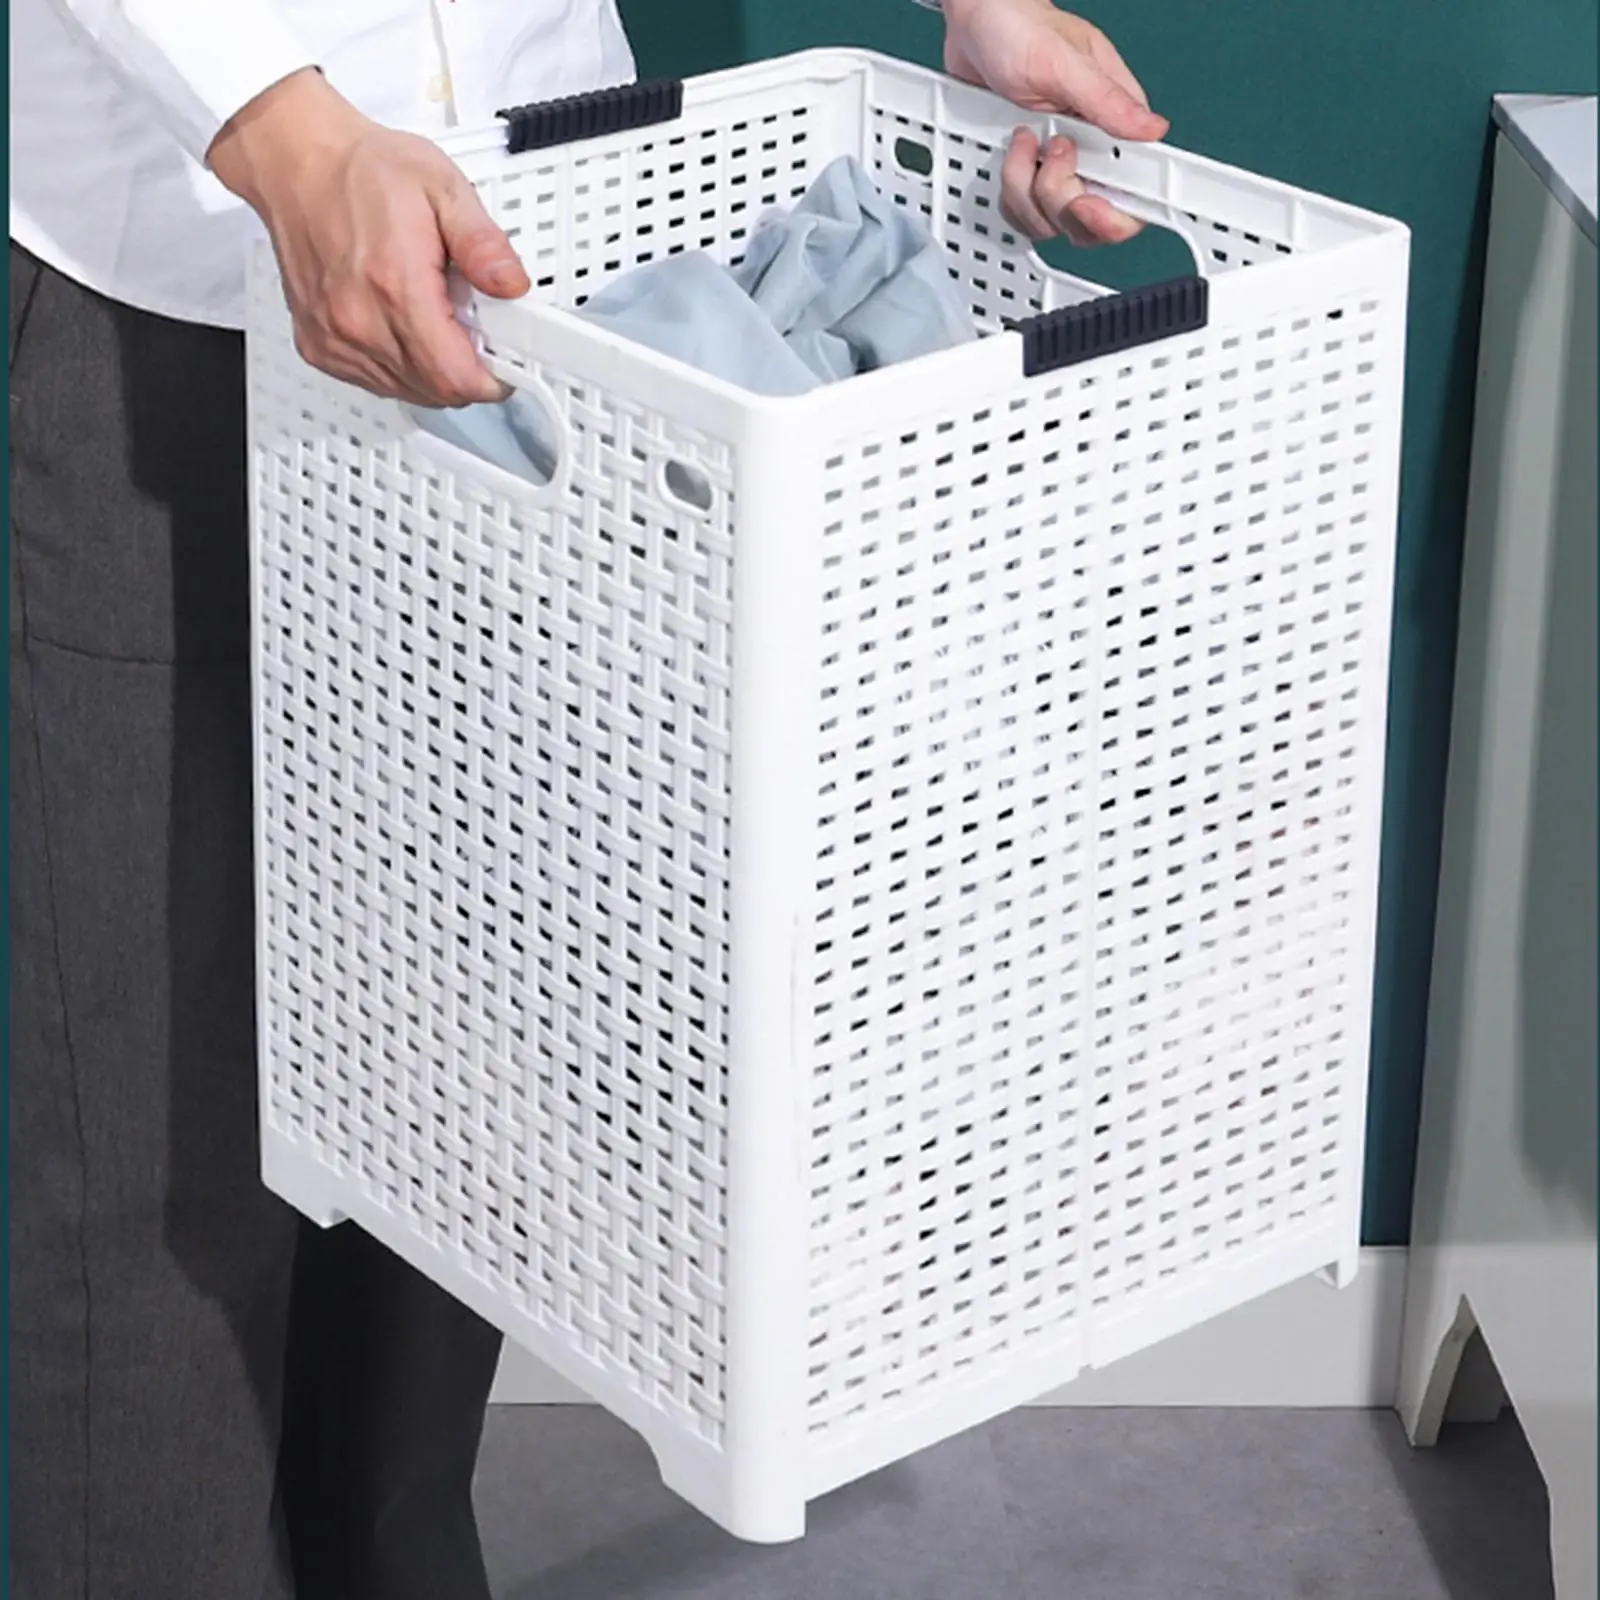 Collapsible Laundry Basket Large Sized with Handles for Laundry Room Bedroom